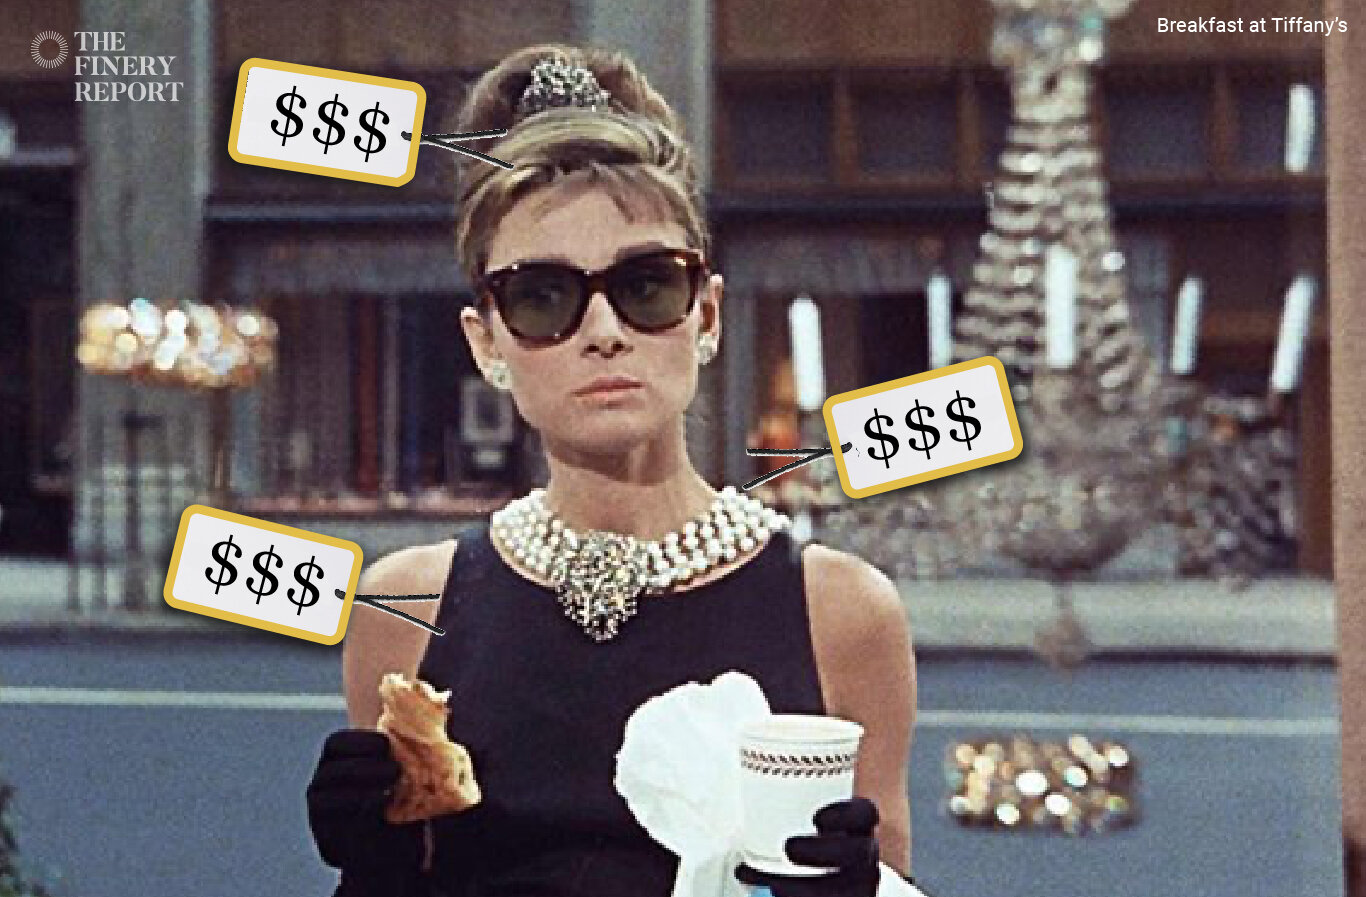 Why is fashion obsessed with wealth? — TFR